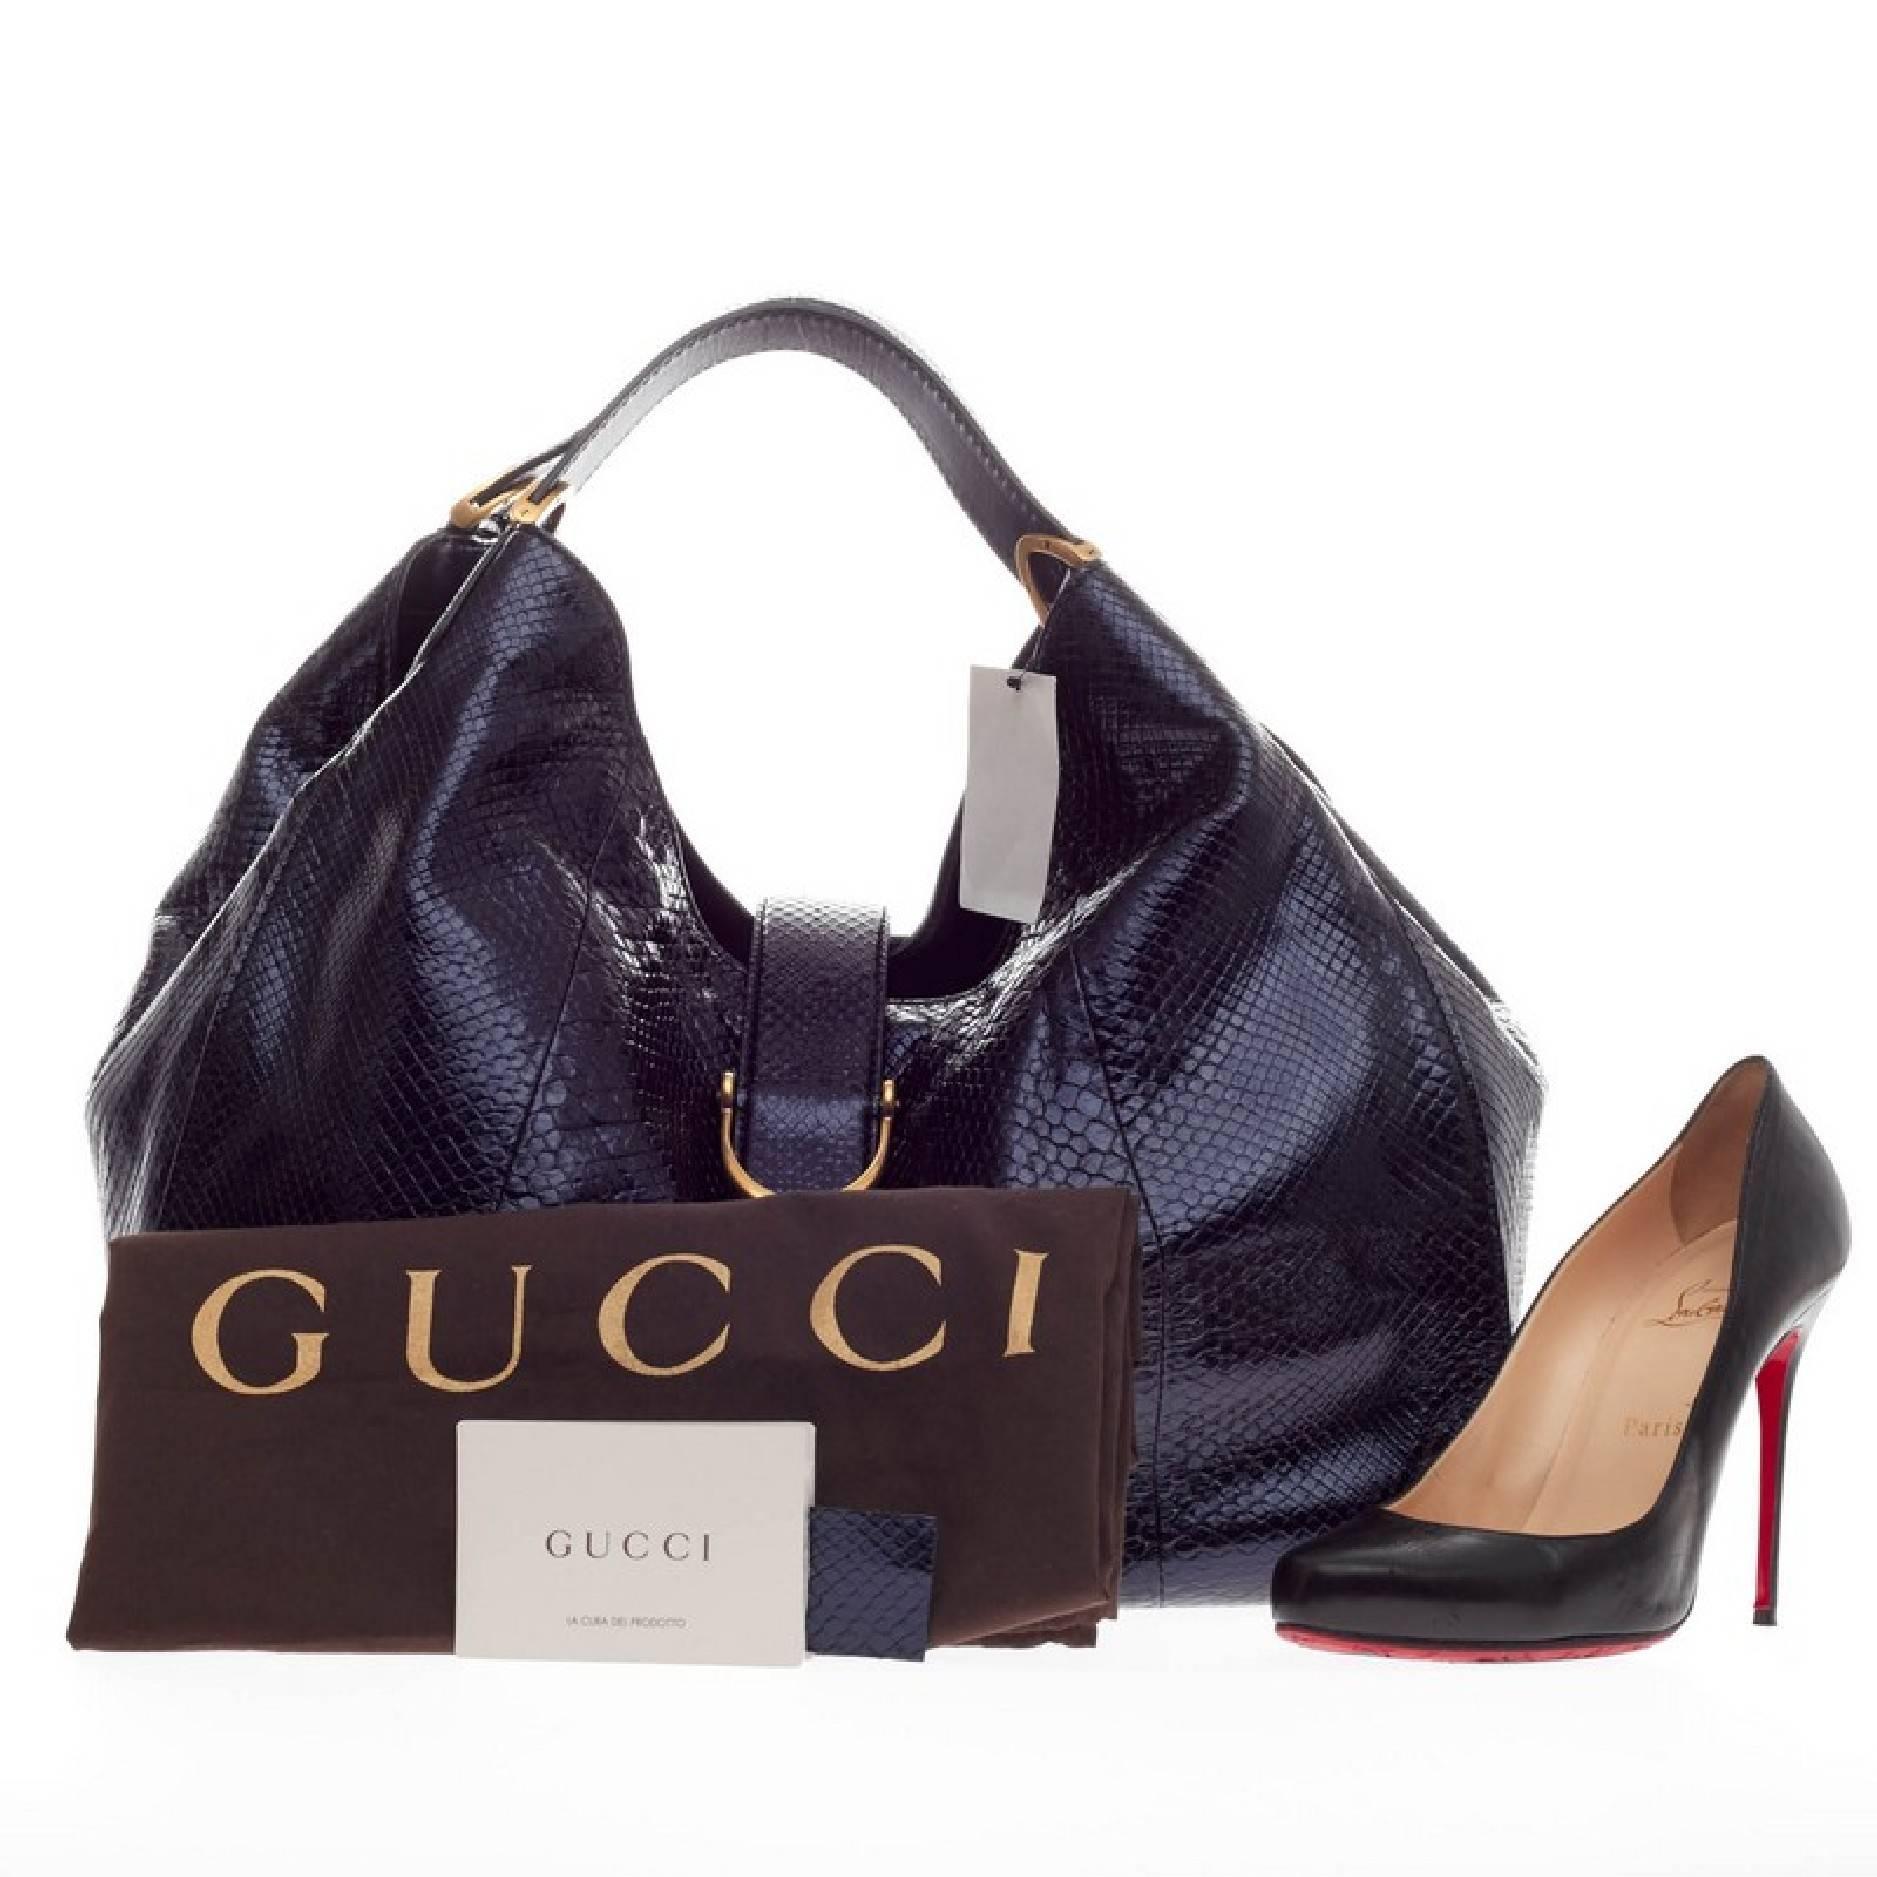 This authentic Gucci Soft Stirrup Tote Python Large in luxurious and sleek design is made for all seasons. Crafted in metallic navy blue genuine python skin, this exotic hobo-style shoulder bag features side to side looped dual-flat handles with